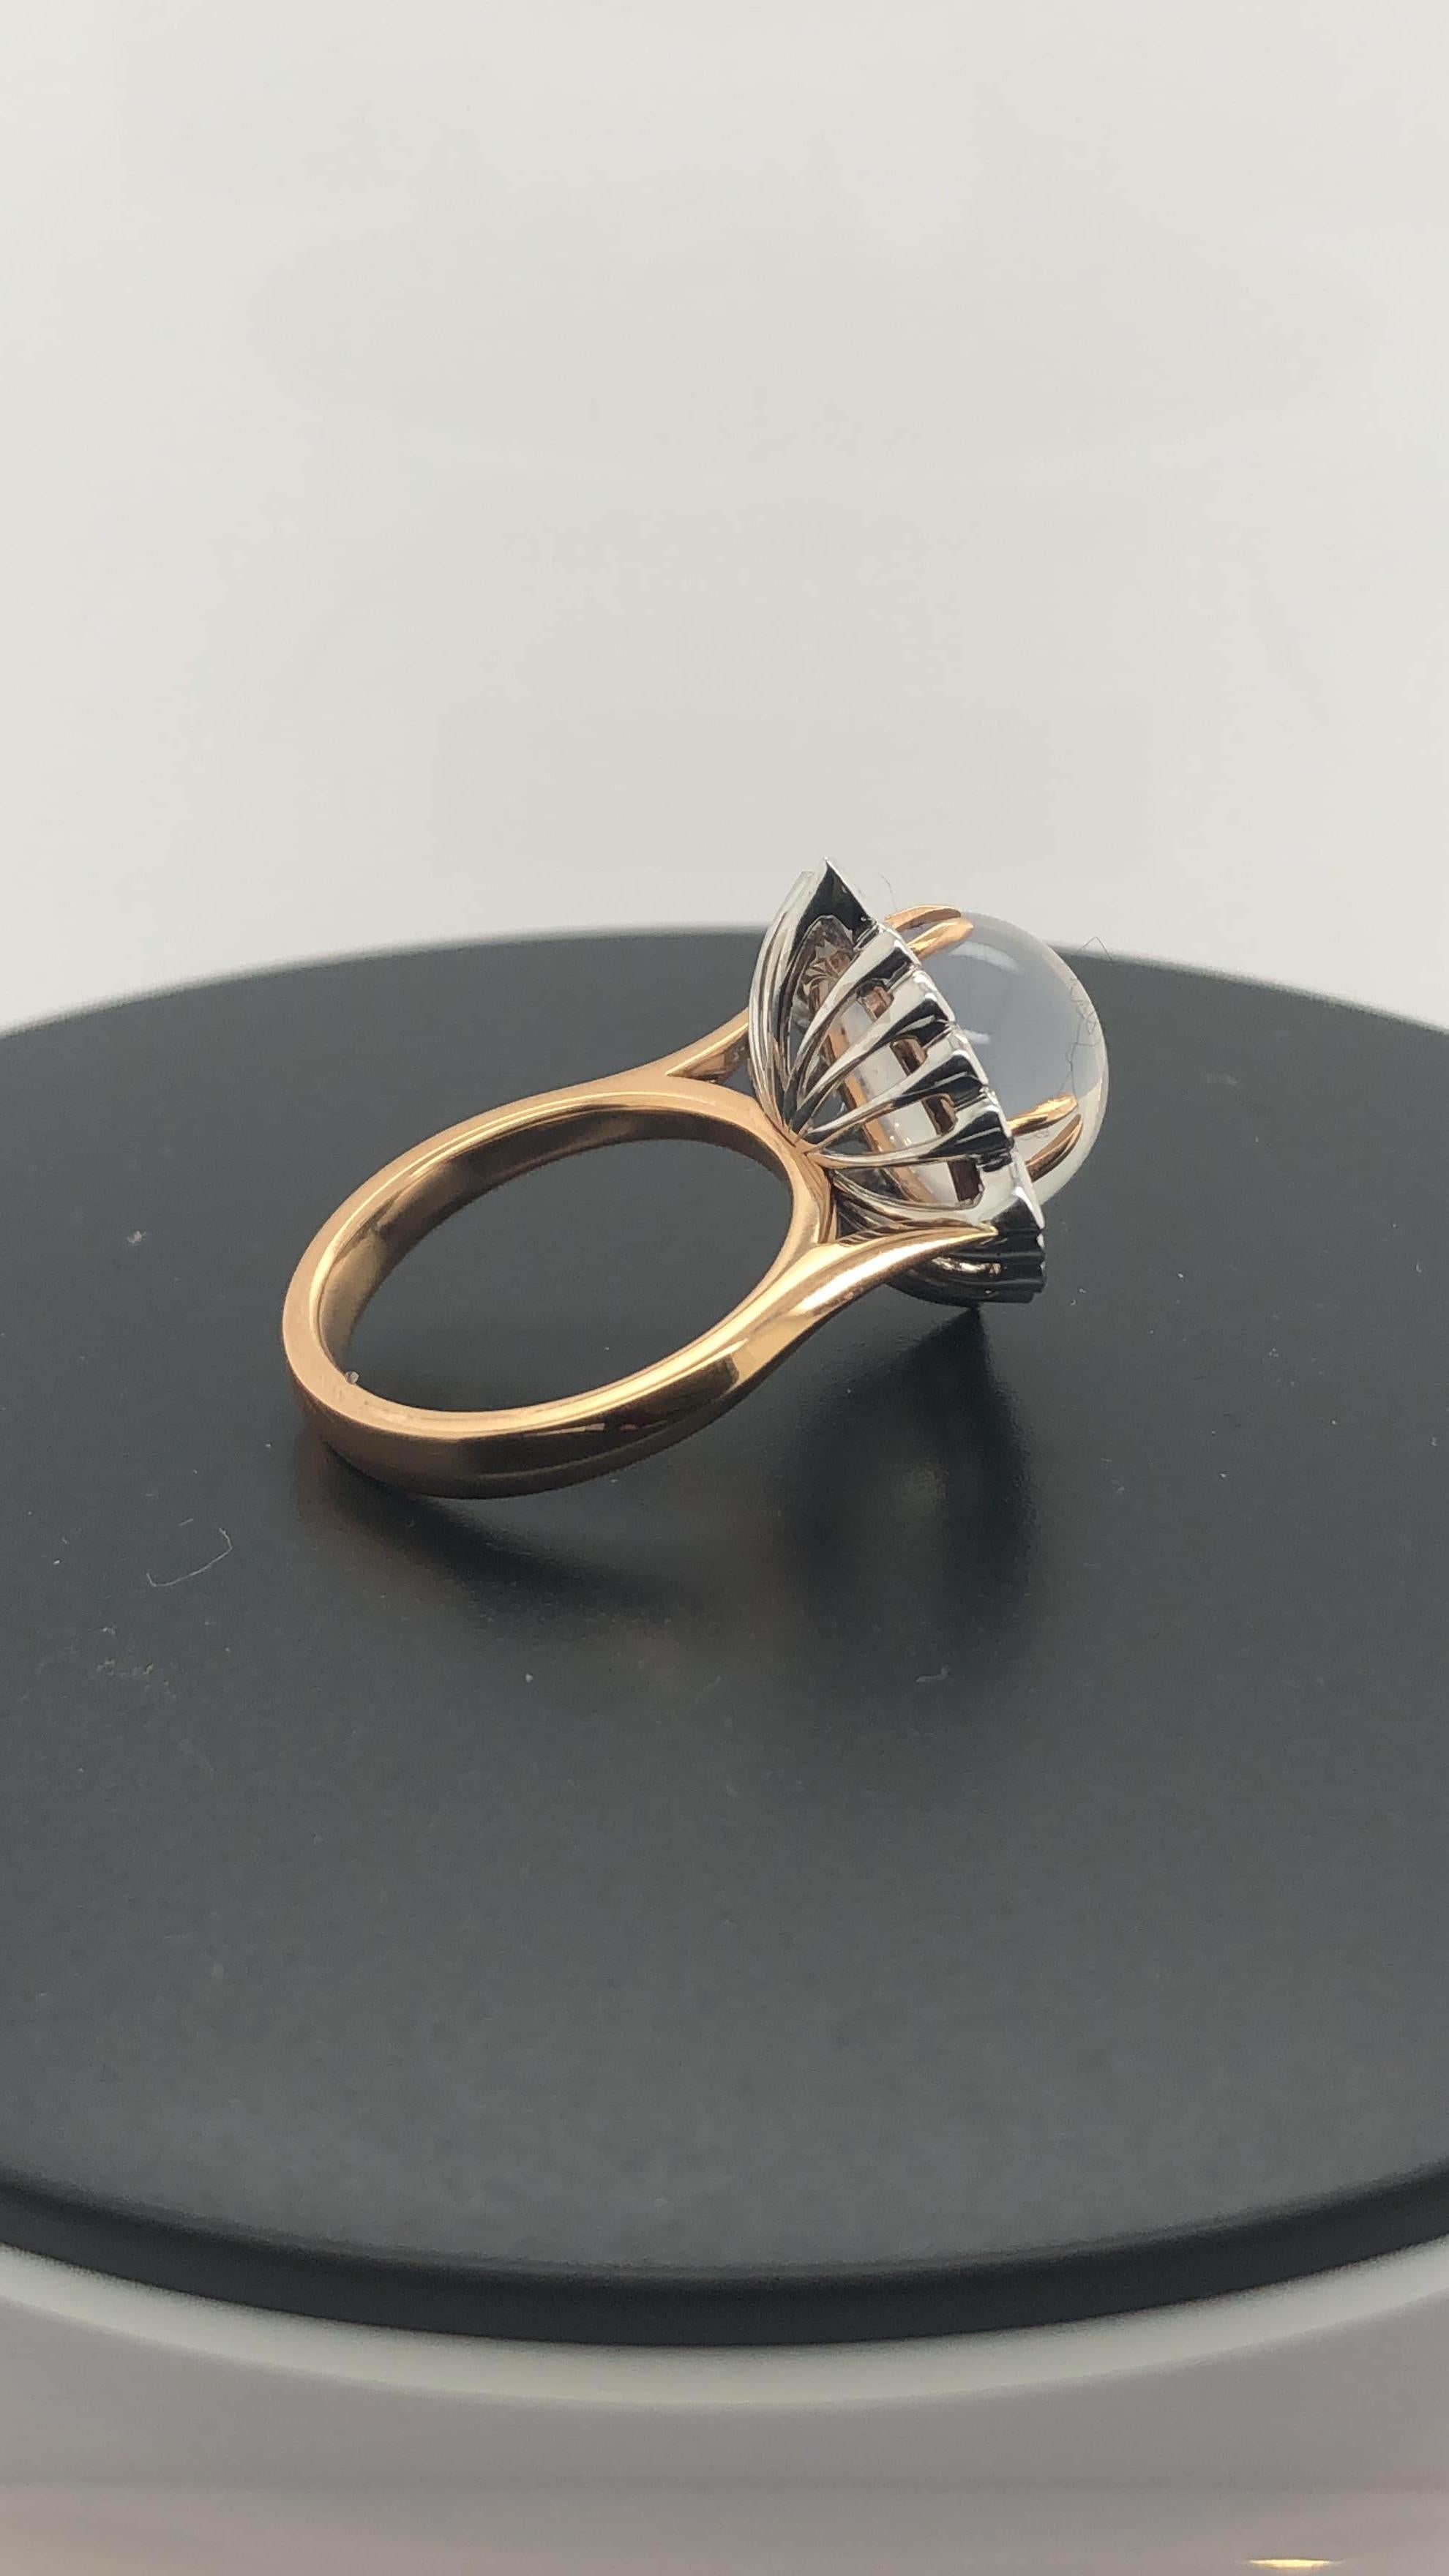 Hand Crafted 18 Carat Rose and White Gold Cocktail Ring, Set with 8.26 Carat Round Moonstone in 4 Split Rose Gold Talons, Surrounded by 20 Round Brilliant Cut and Pear Shaped Diamonds, weighing 0.85 Carats, F in Colour, VS in Clarity, in a Semi